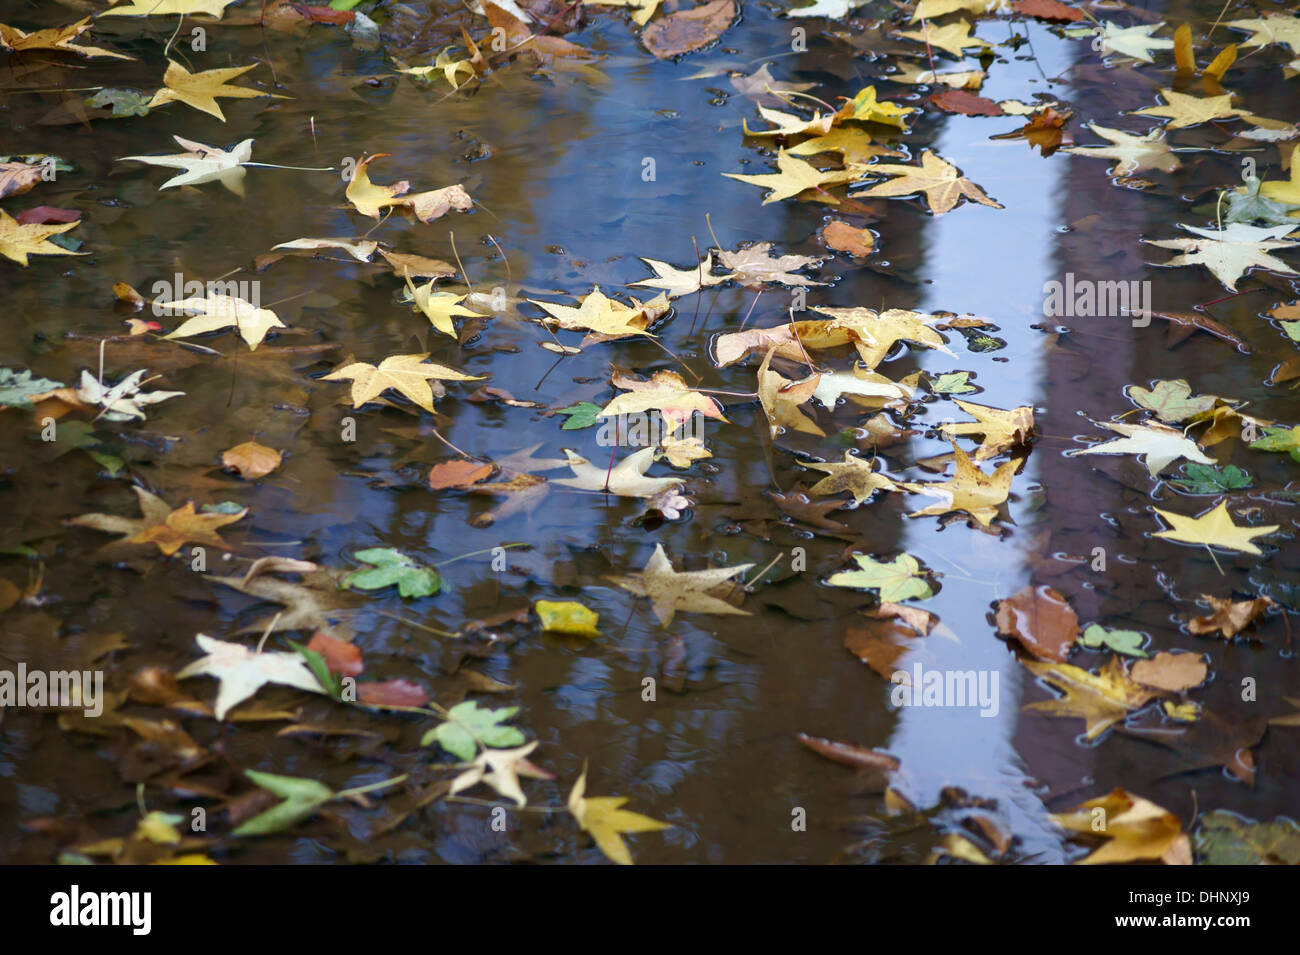 Autumn leaves in a puddle Stock Photo